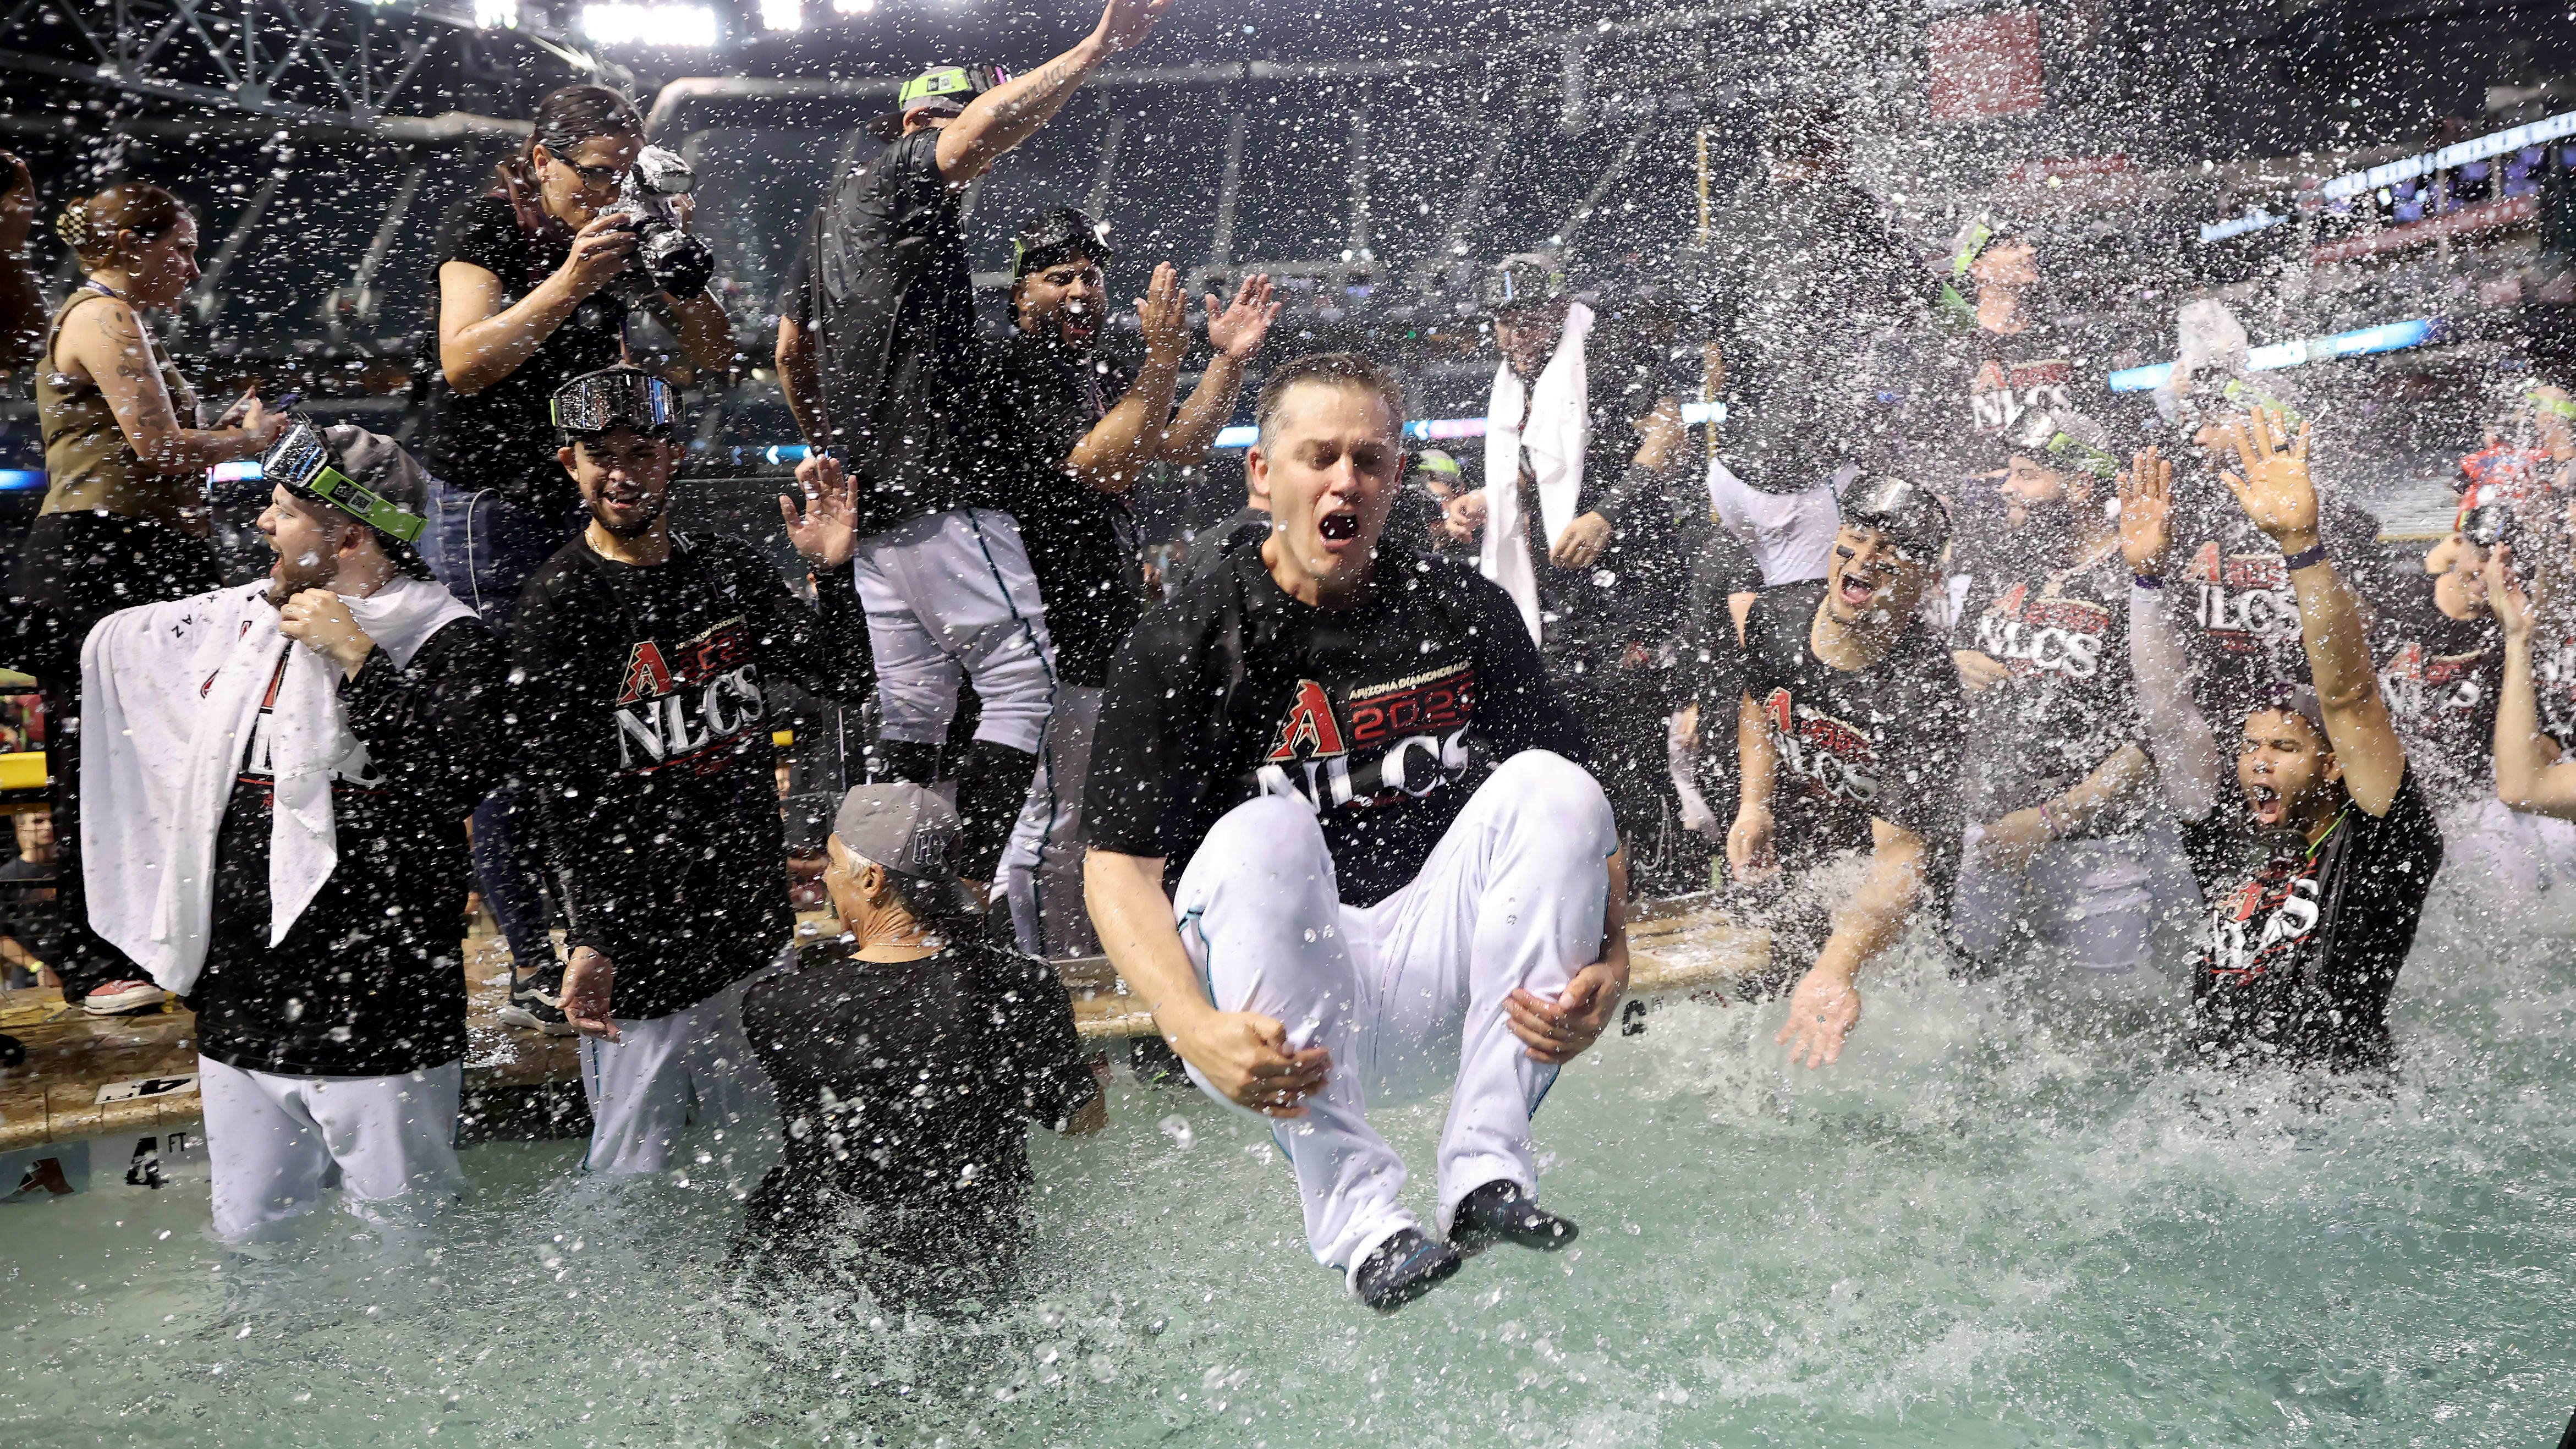 The D-backs celebrate by jumping into the pool at Chase Field